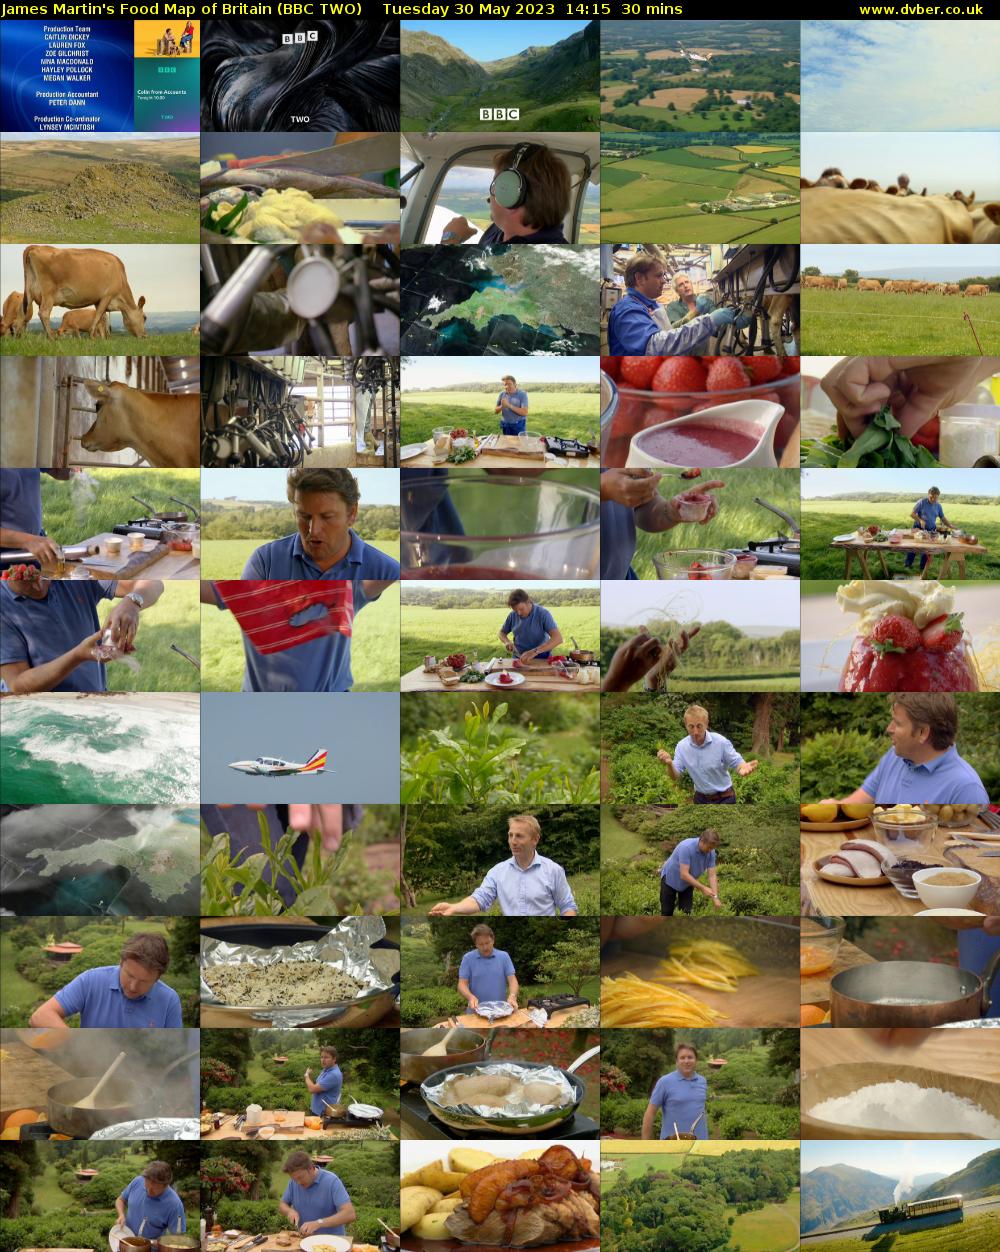 James Martin's Food Map of Britain (BBC TWO) Tuesday 30 May 2023 14:15 - 14:45